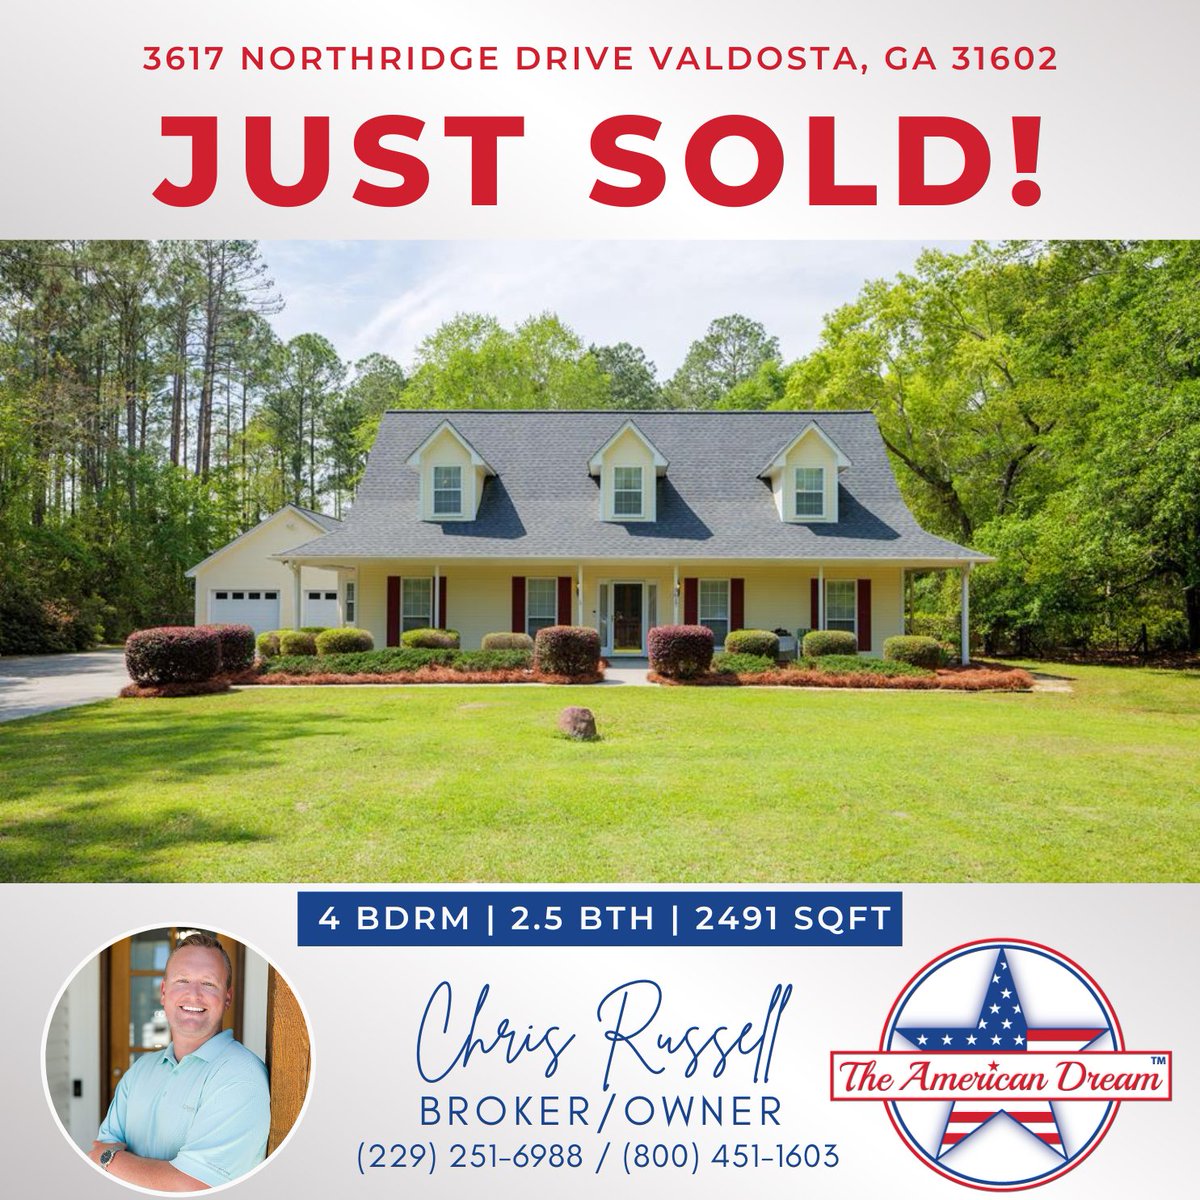 Just Sold in River Chase Subdivision!🎉

BIG THANKS to Angela Benefield with Canopy Realty Group for bringing the buyer and executing a seamless transaction!🤝

L👀KING to Buy, Sell, Build or Invest in Real Estate?🏡

#TheAmericanDream 🇺🇸 #TheDreamTeam